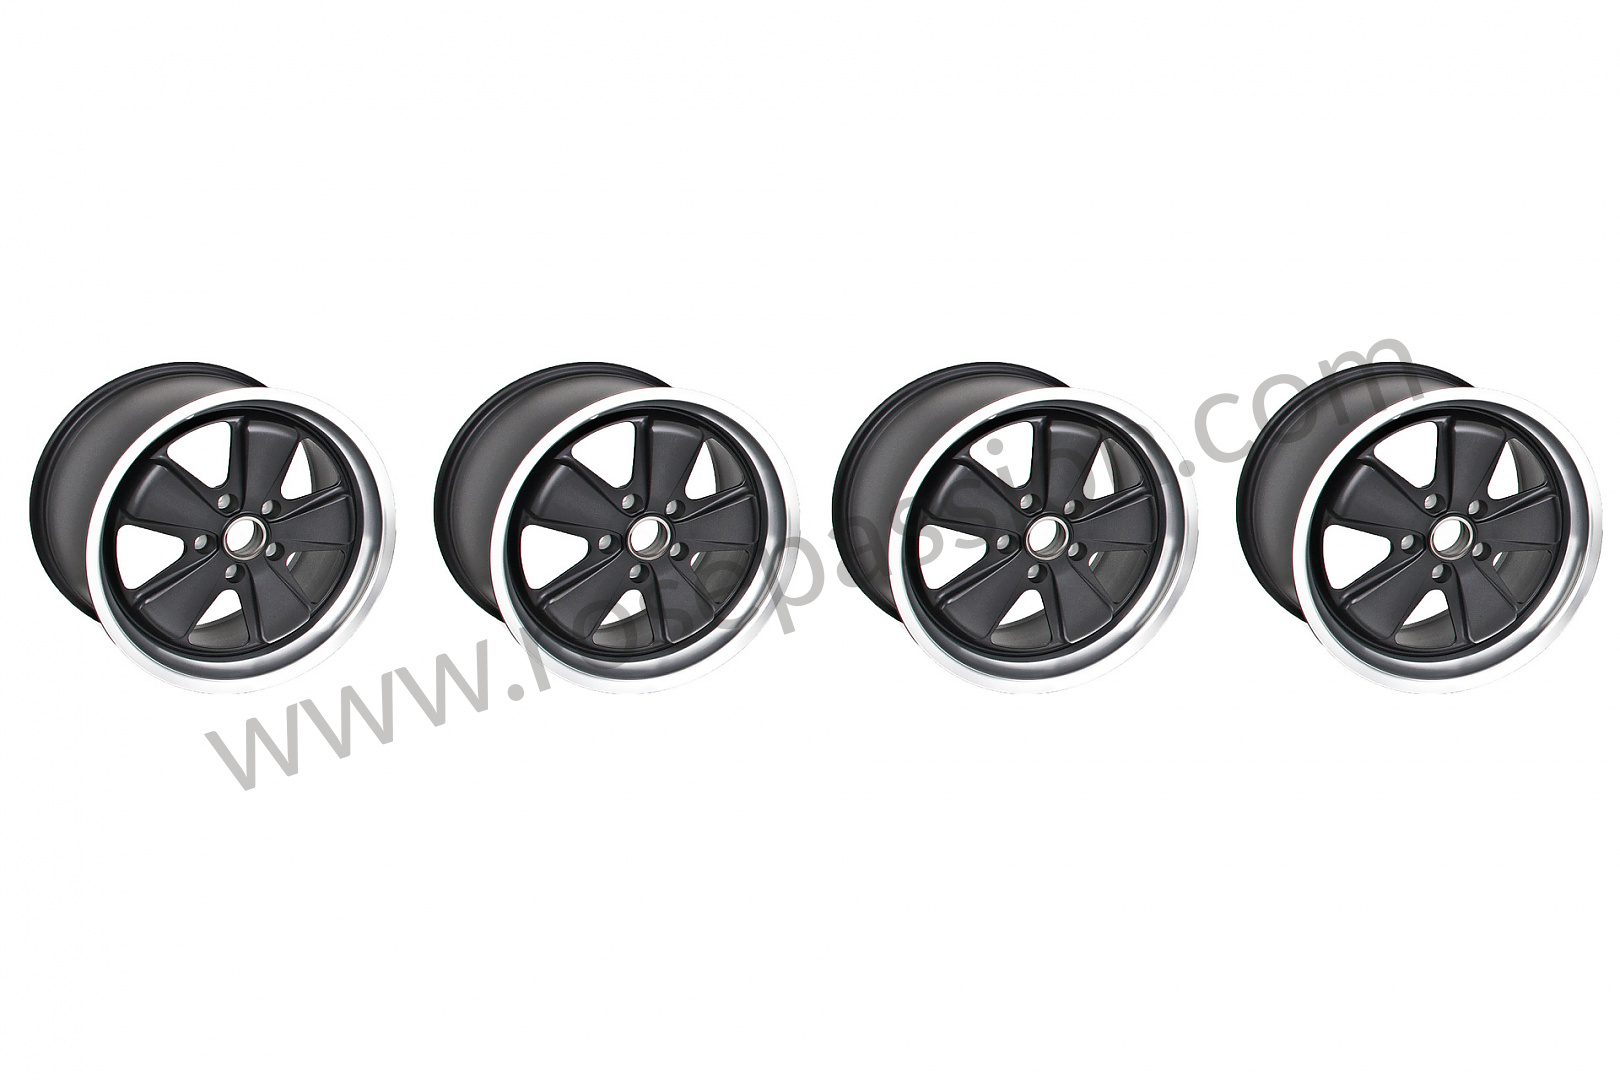 P198488 - Original fuchs wheels, 17 inch, set of 4 wheels, 7 and 9 inch  (black finish) - ET55 FRONT + ET55 REAR INCHES for Porsche 996 / 911 Carrera  / 2005 / 996 carrera 2 / Targa / Manual gearbox, 6 speed